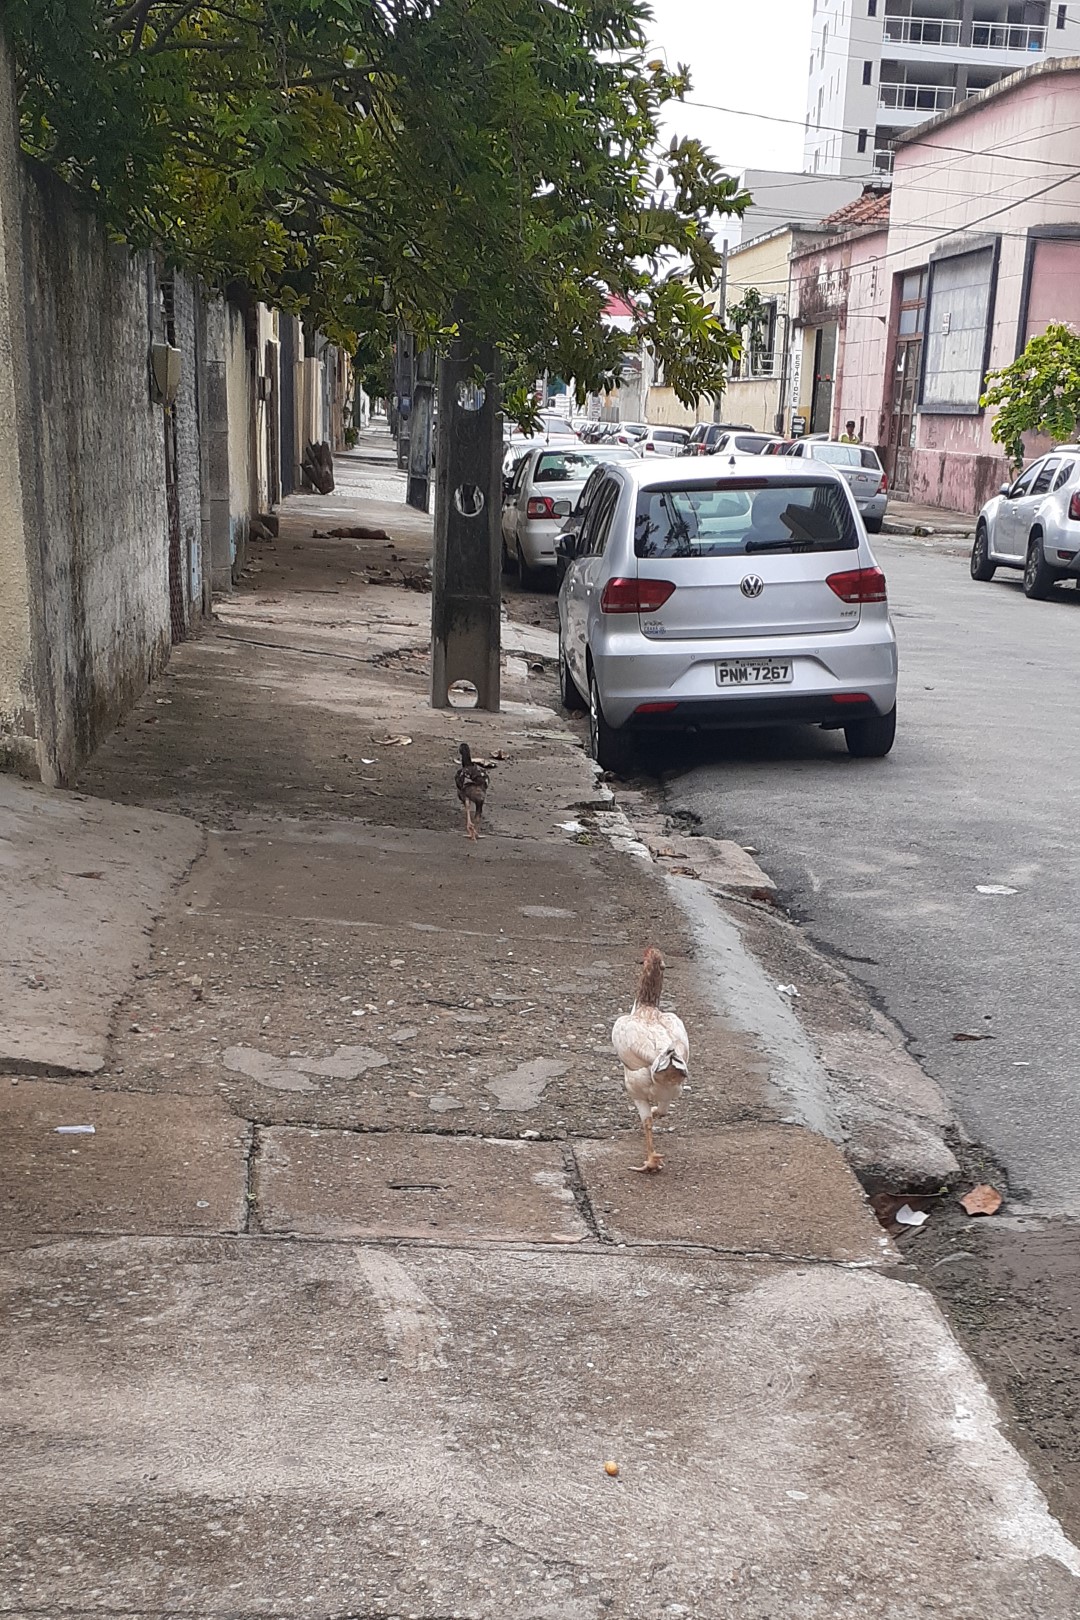 Chickens showing the way to the Centro Dragão do Mar, Fortaleza